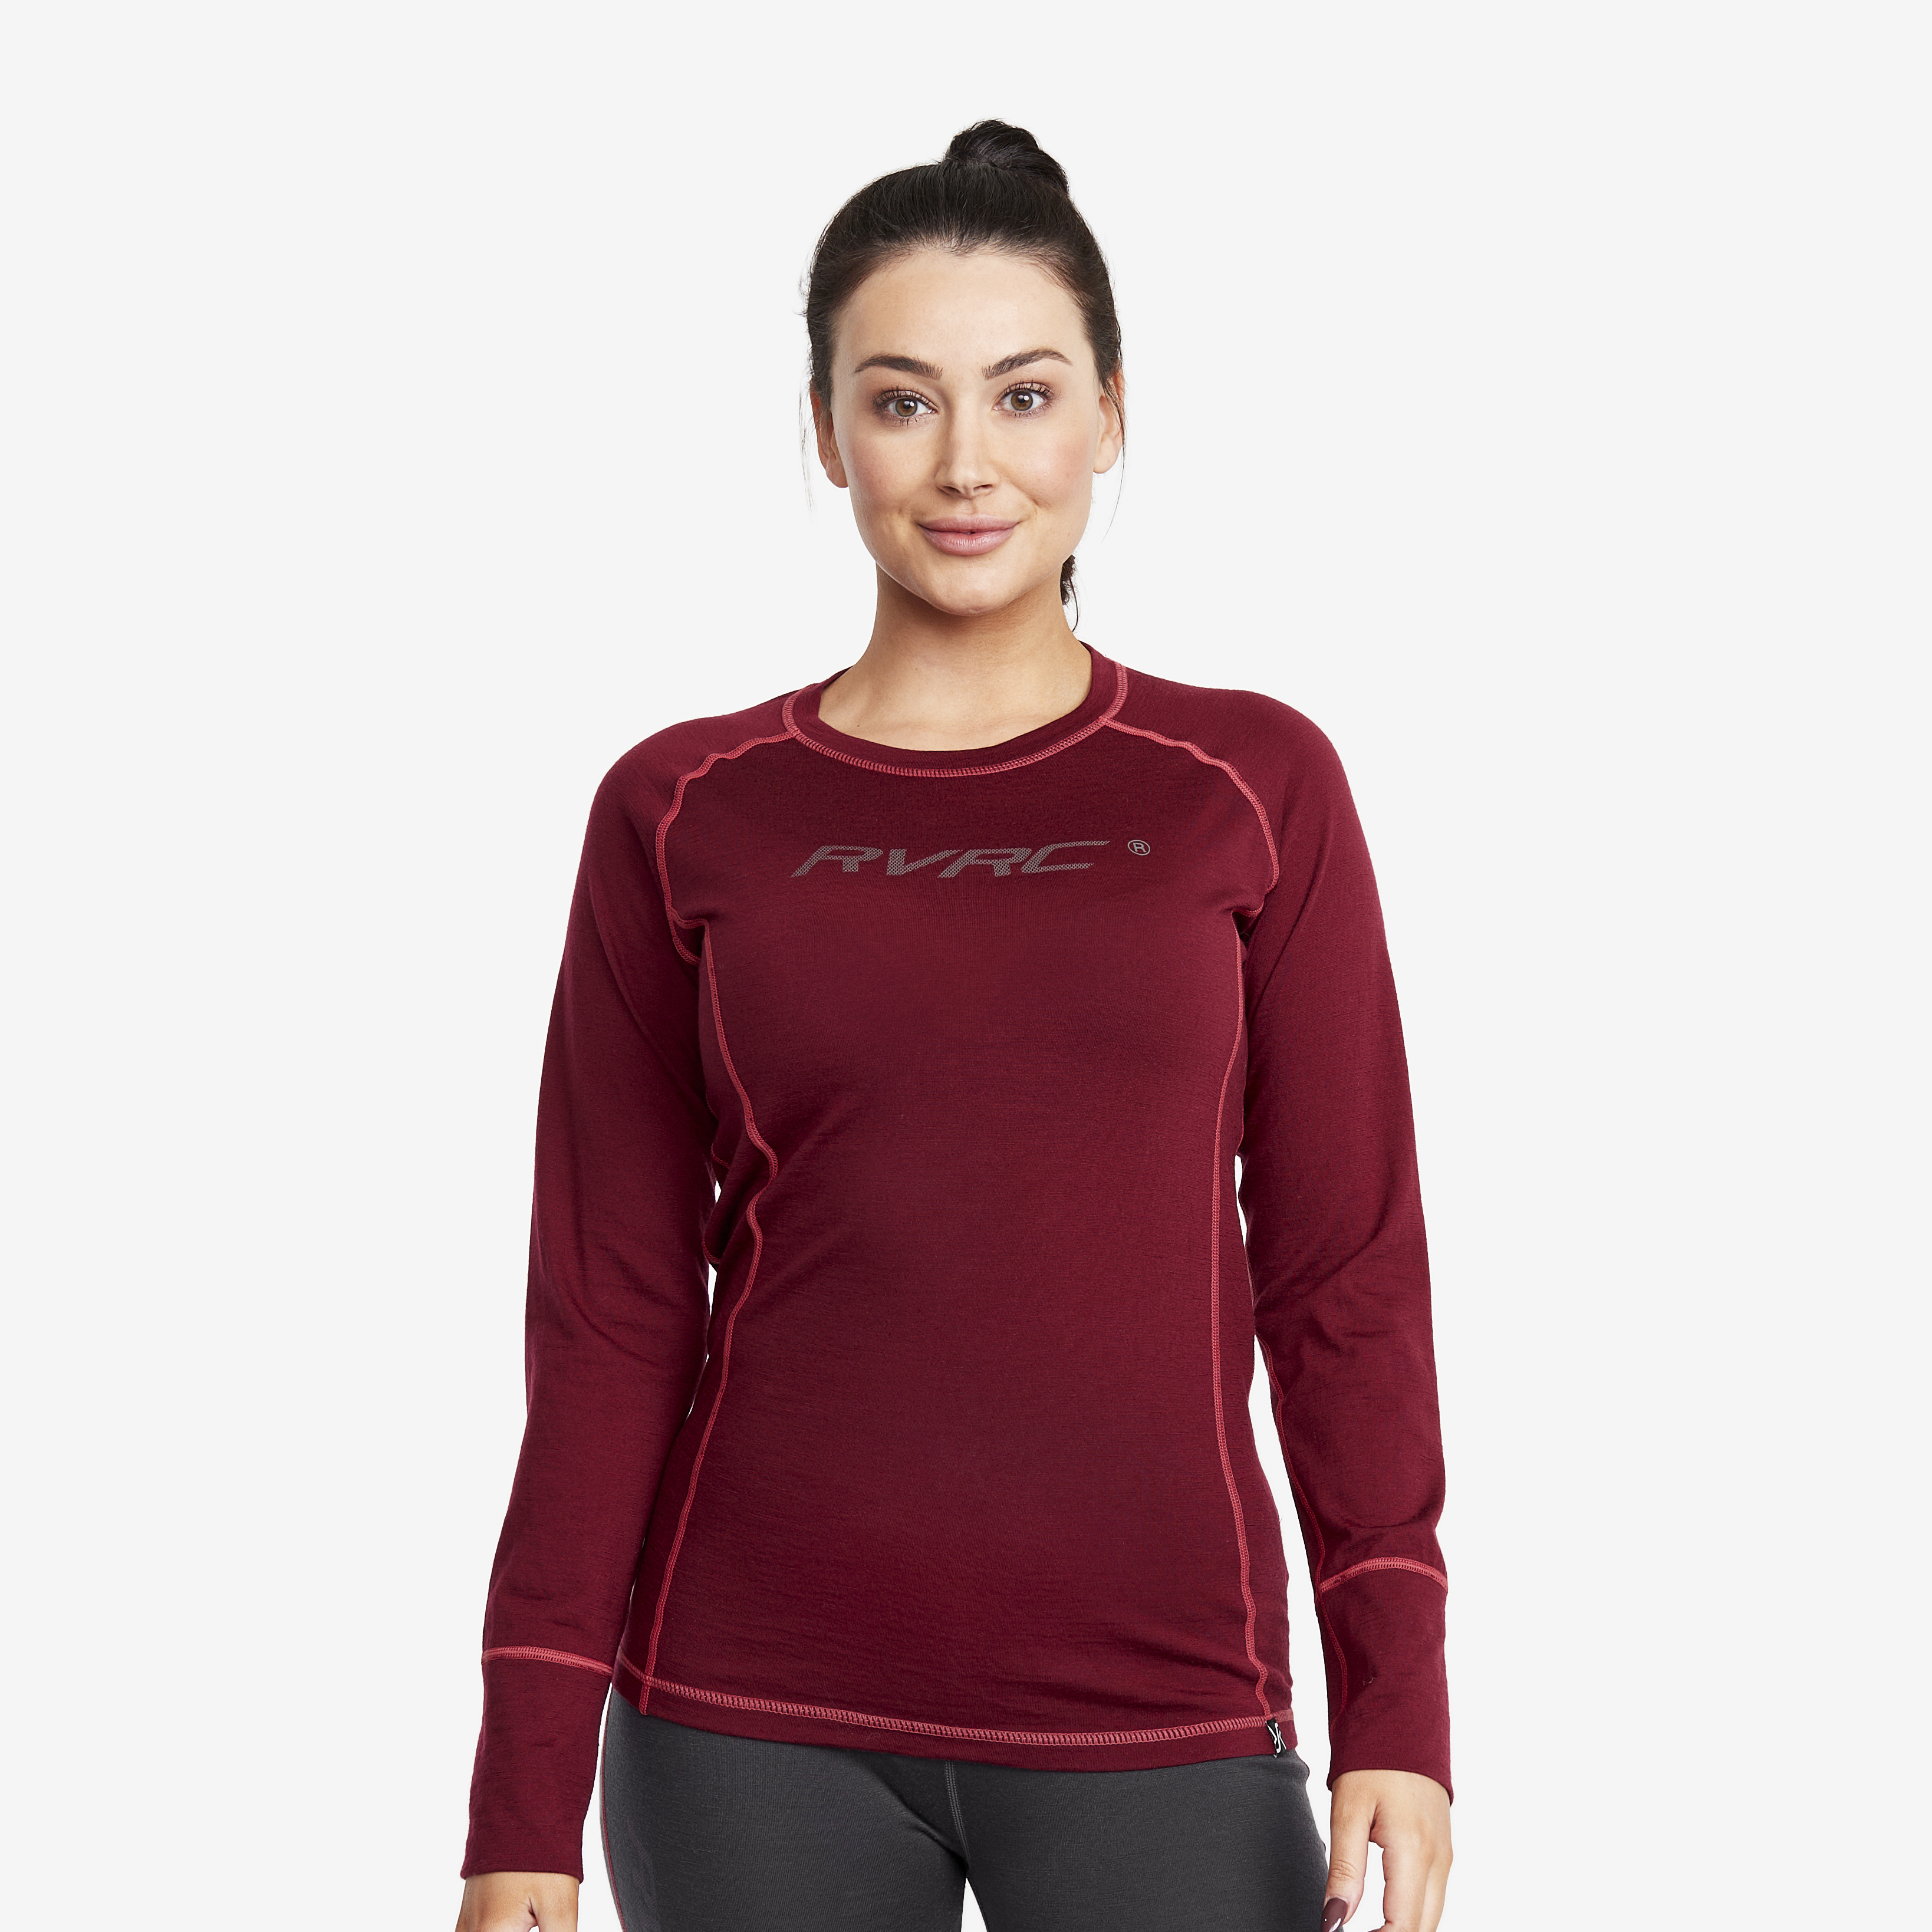 Outright Merino Top Bison Red/ Anthracite Naiset